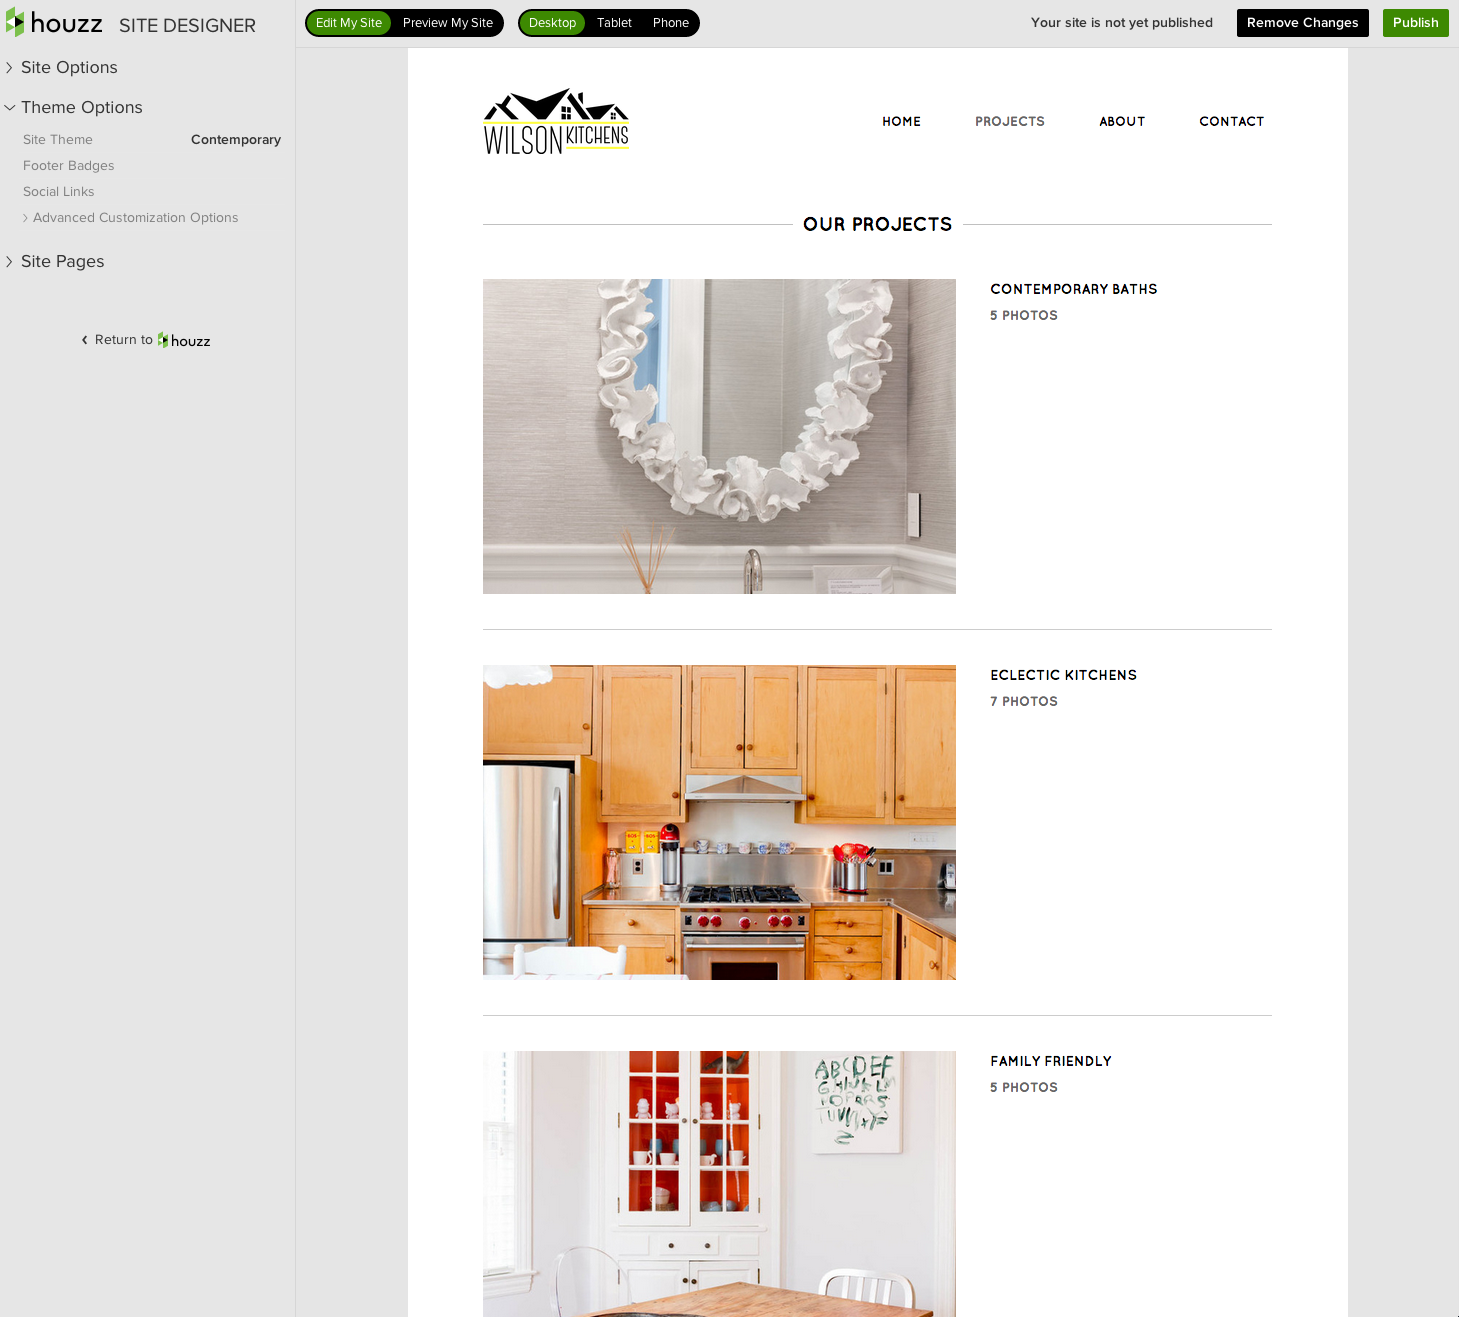 Houzz Launches Site Designer, Offers Free Websites For Home